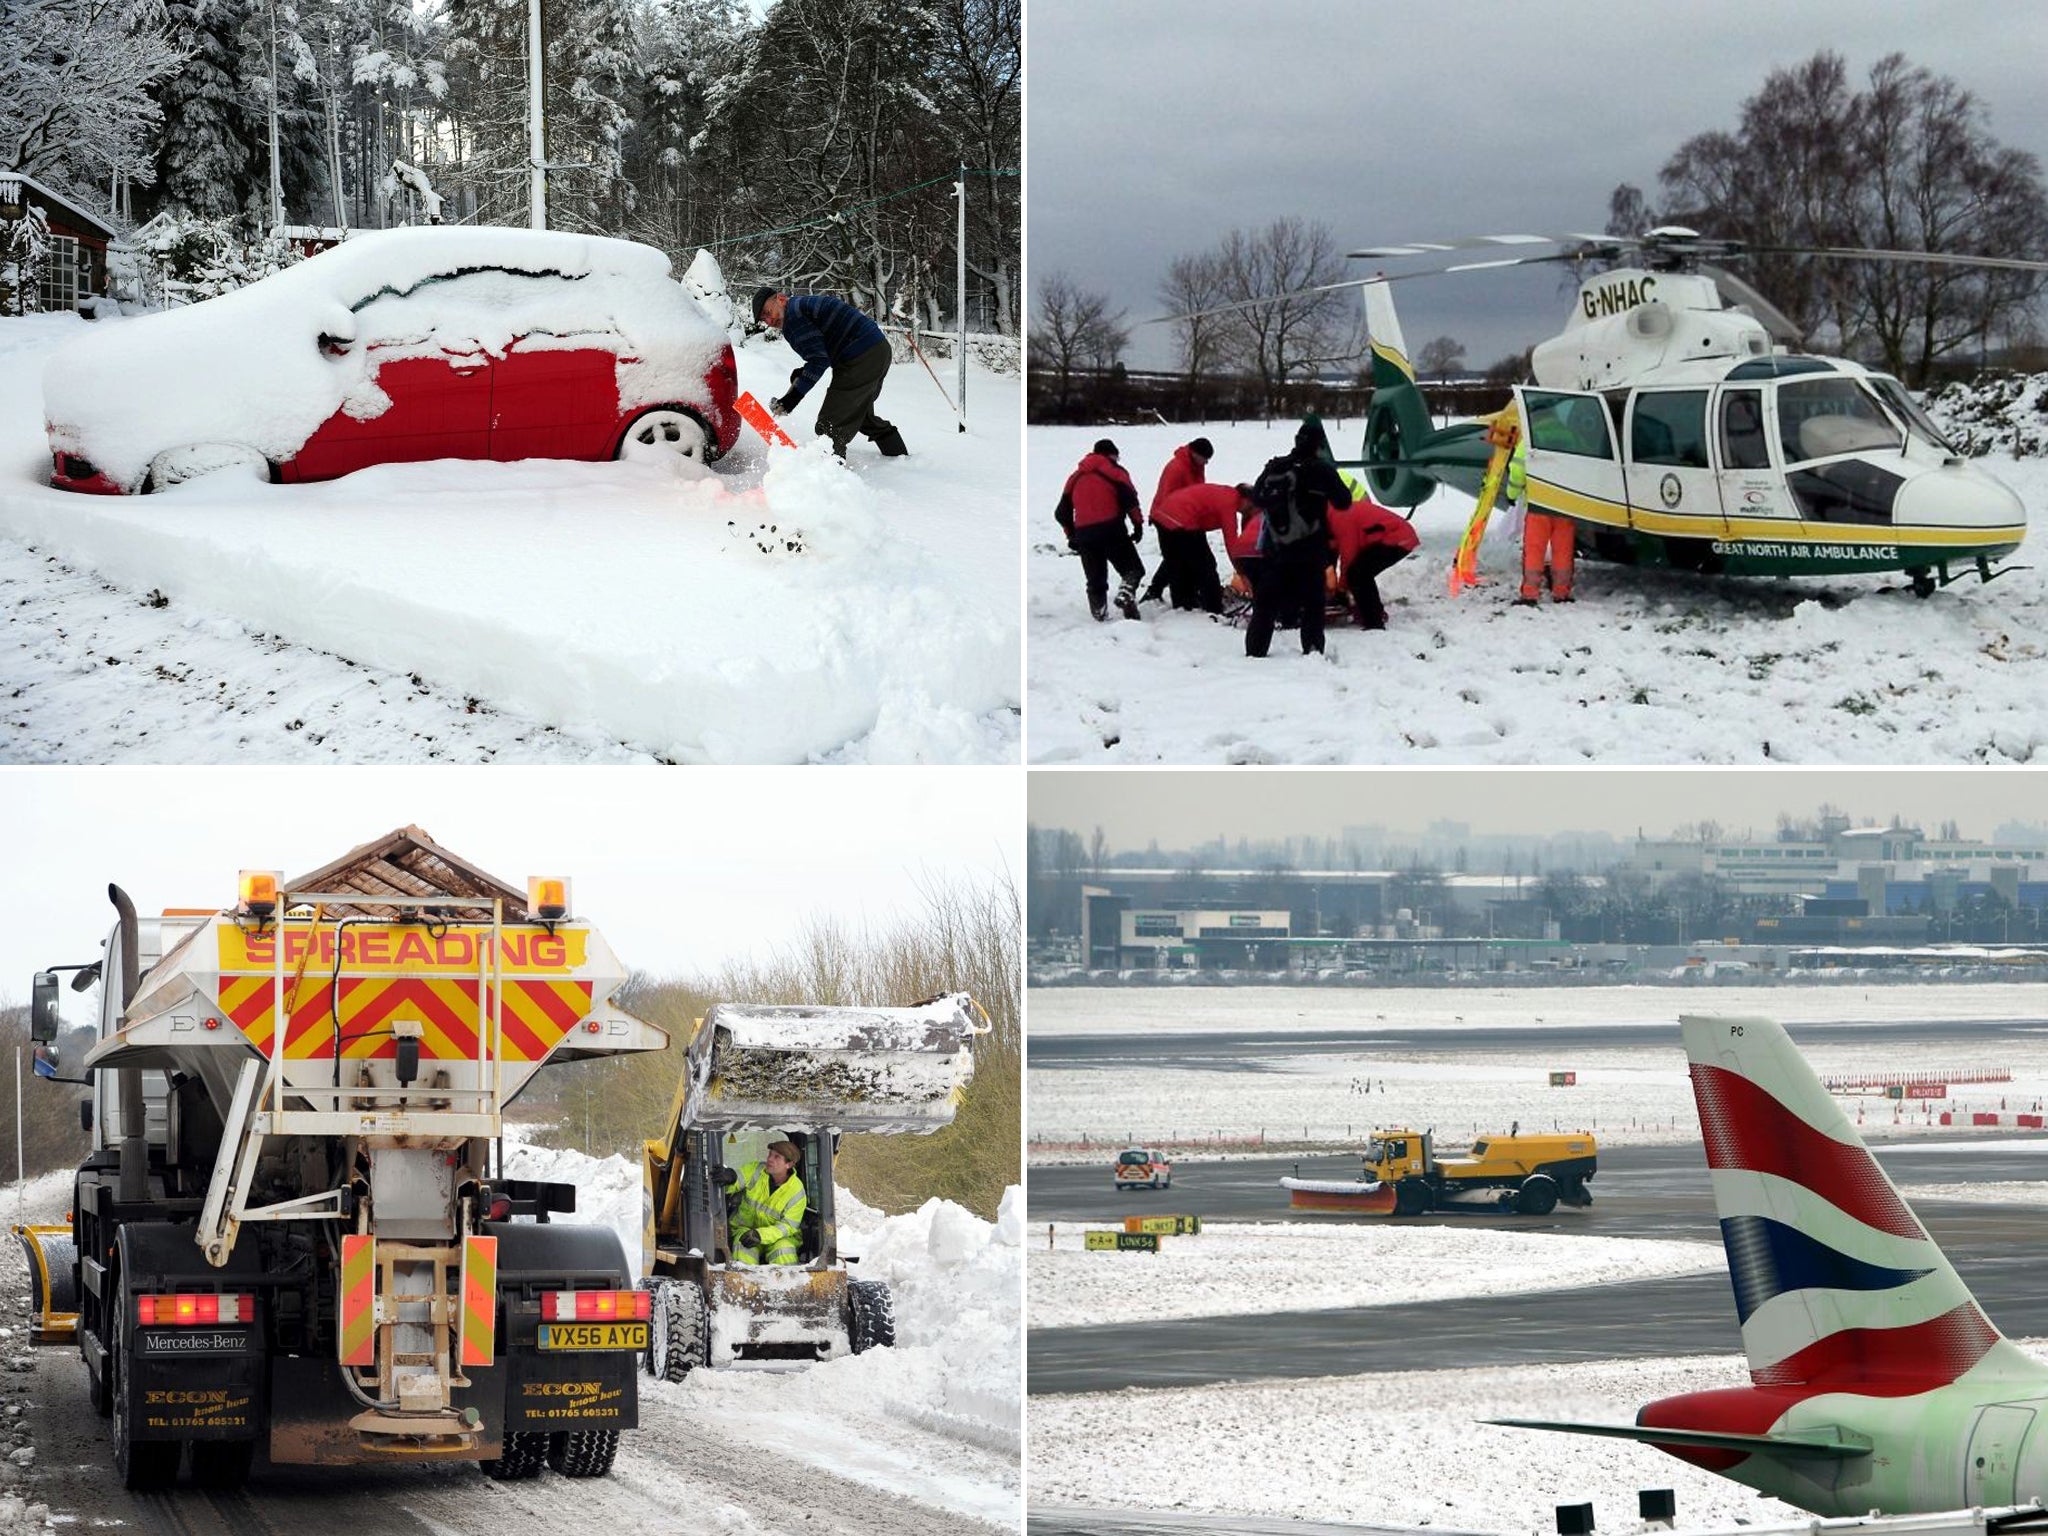 Clockwise from top left: A man clears snow from his car in Northumberland; A teenager is airlifted to hospital following a sledging accident in Middlesbrough; Workers clear the road of ice and snow in Gloucestershire; 40 flights were cancelled from Heath